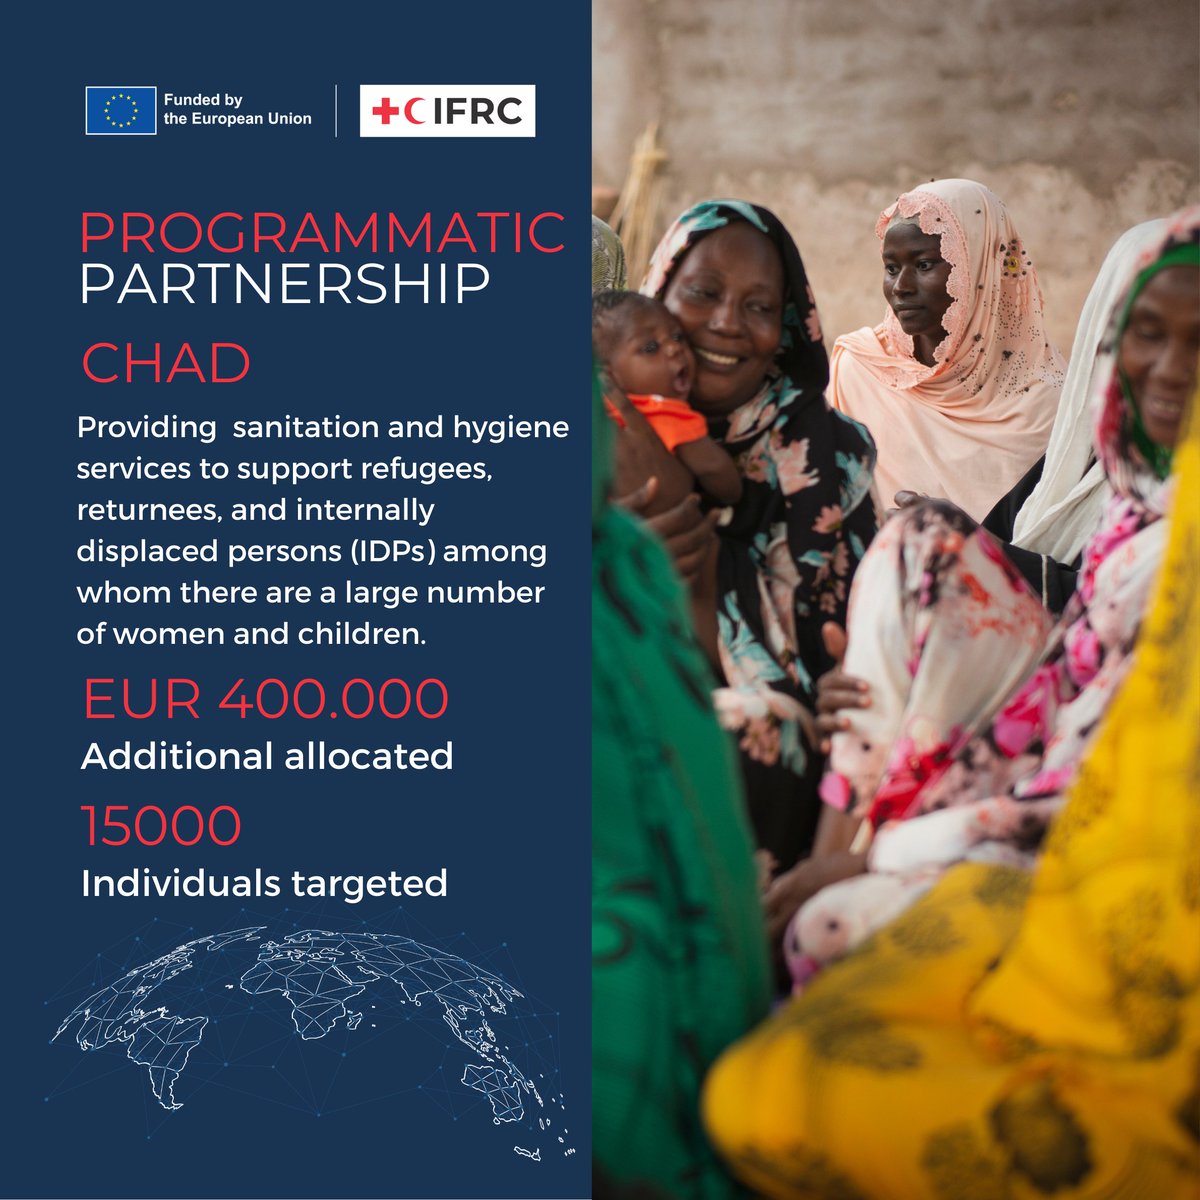 Thanks to the EU (@eu_echo), @CroixRougeLu and @CroixRougeTchad constructed 300 latrines, 50 showers and promoted hygiene practices in Eastern Chad, combating the Hepatitis E epidemic. #ForLocalAction